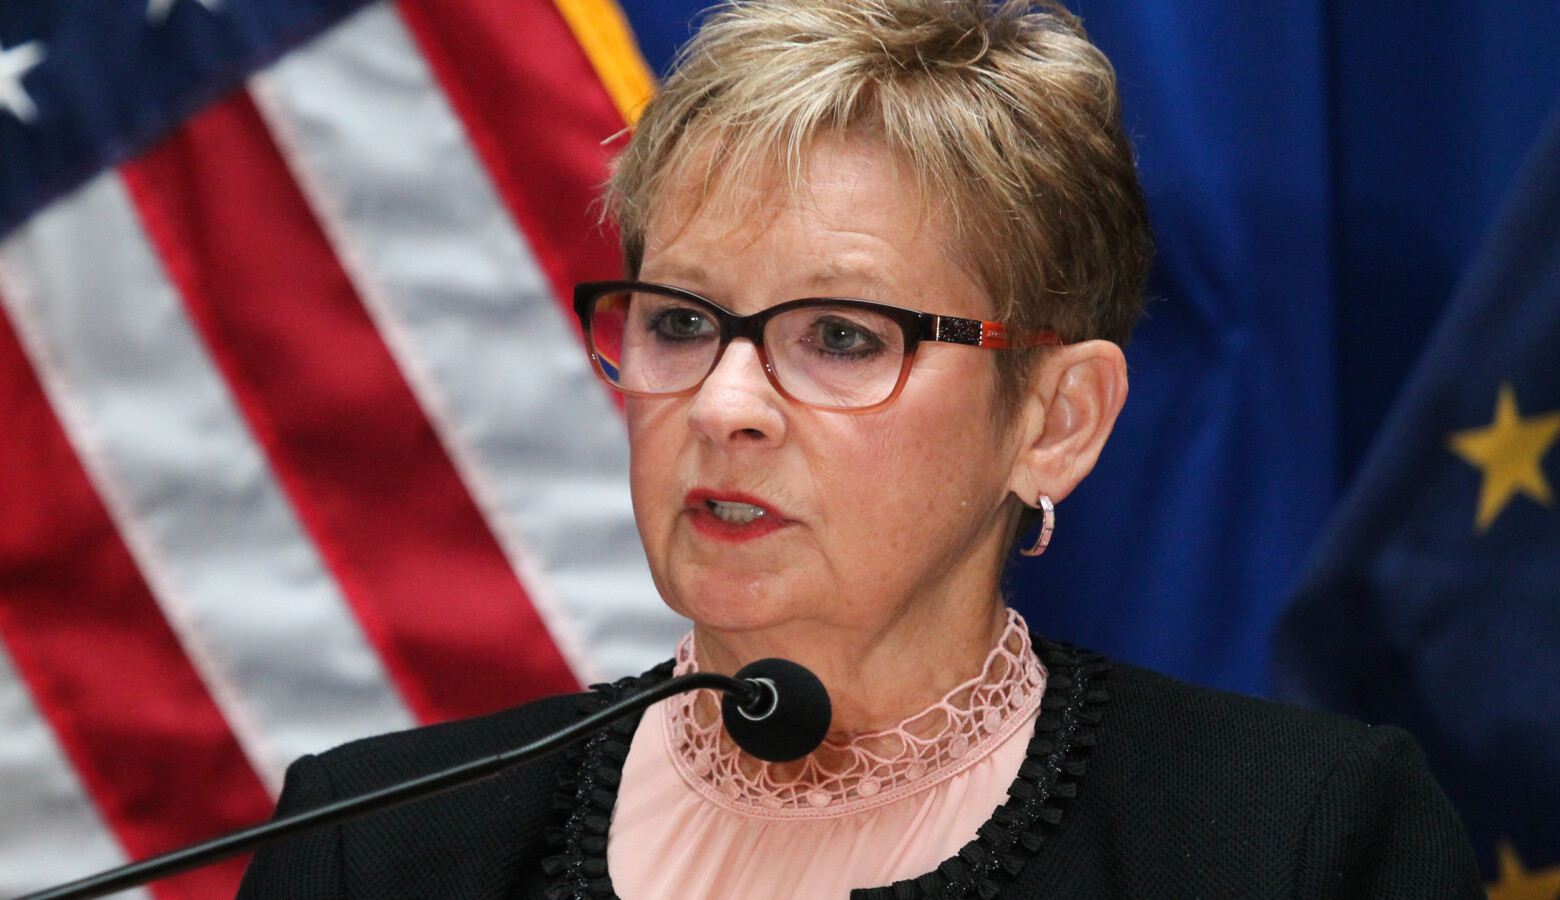 Indiana Secretary of State Connie Lawson says it's her goal to have a "normal" election in November - which would not include expanded vote-by-mail. (Lauren Chapman/IPB News)